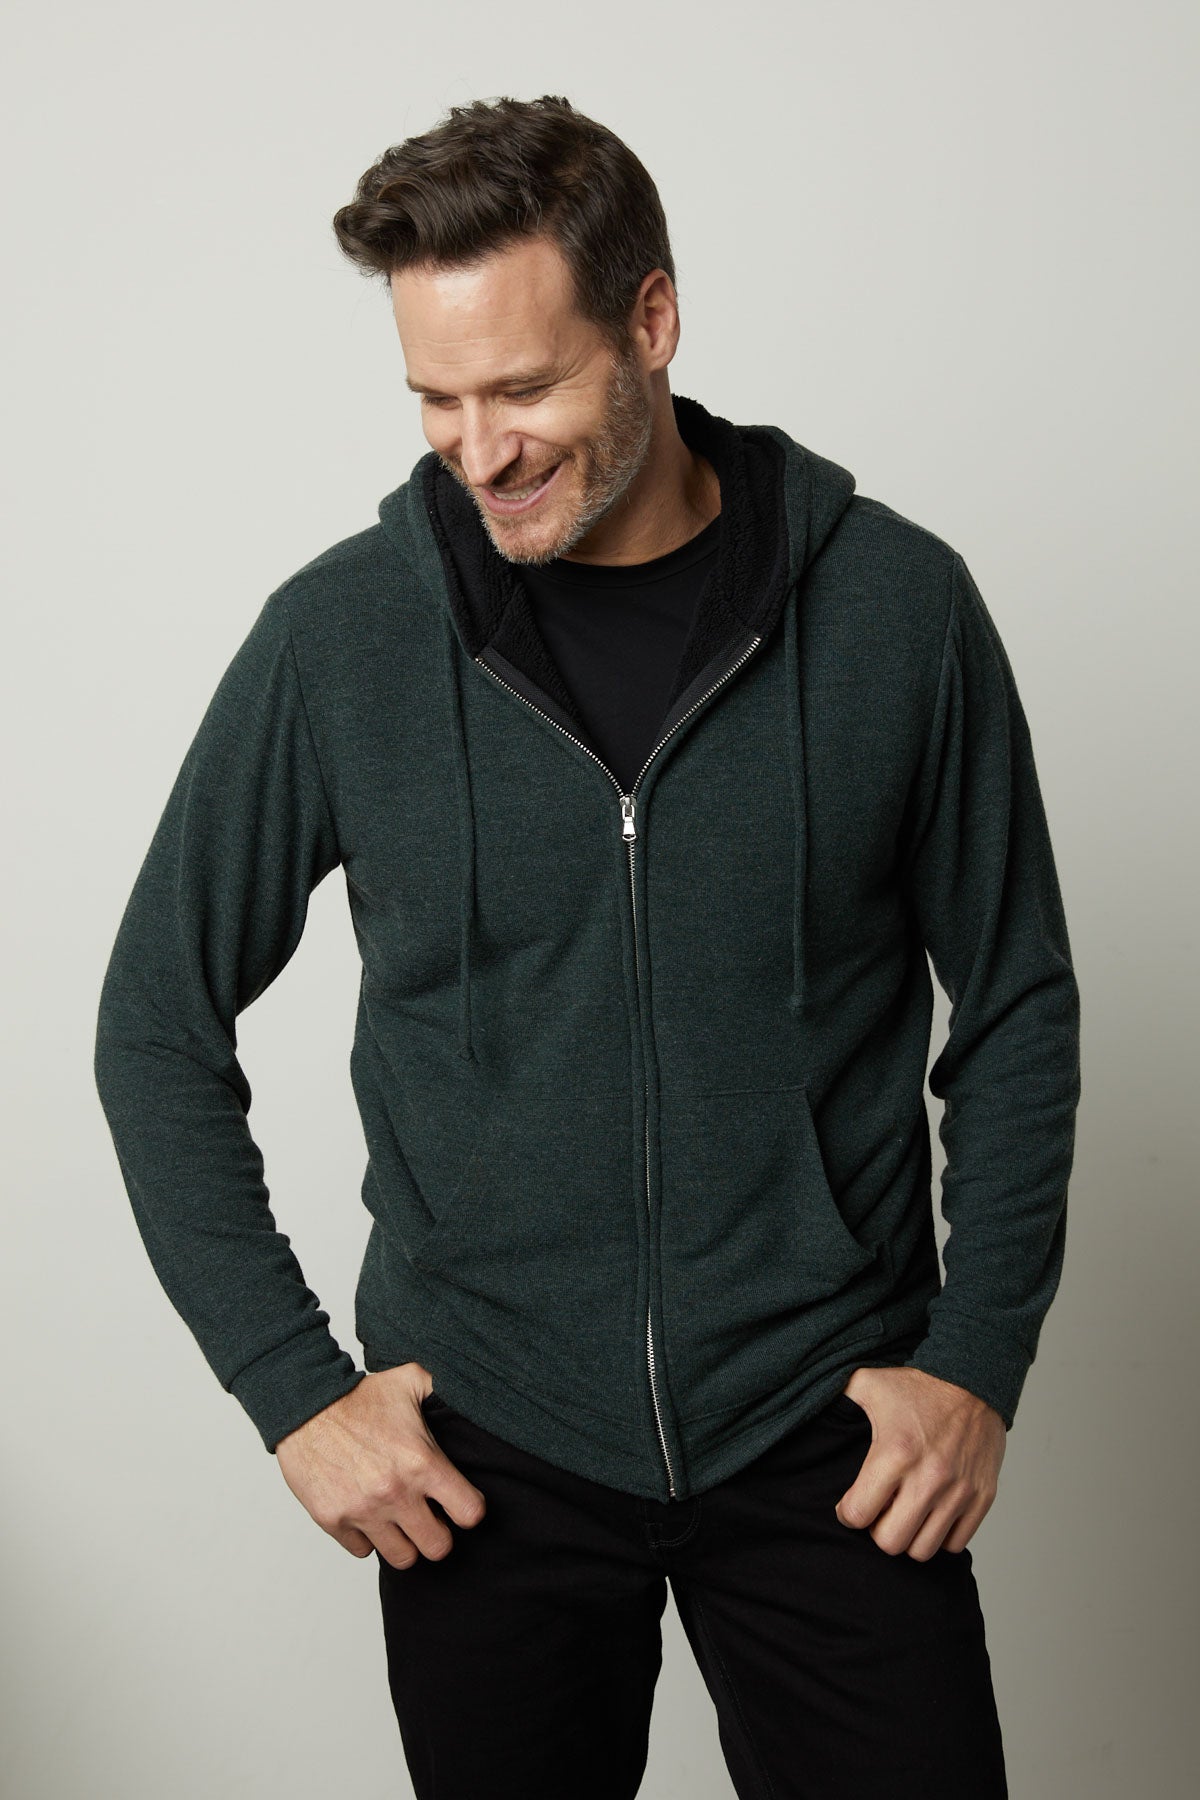 A man wearing a Velvet by Graham & Spencer SALVADORE SHERPA LINED HOODIE with an adjustable drawstring hood.-35605834170561